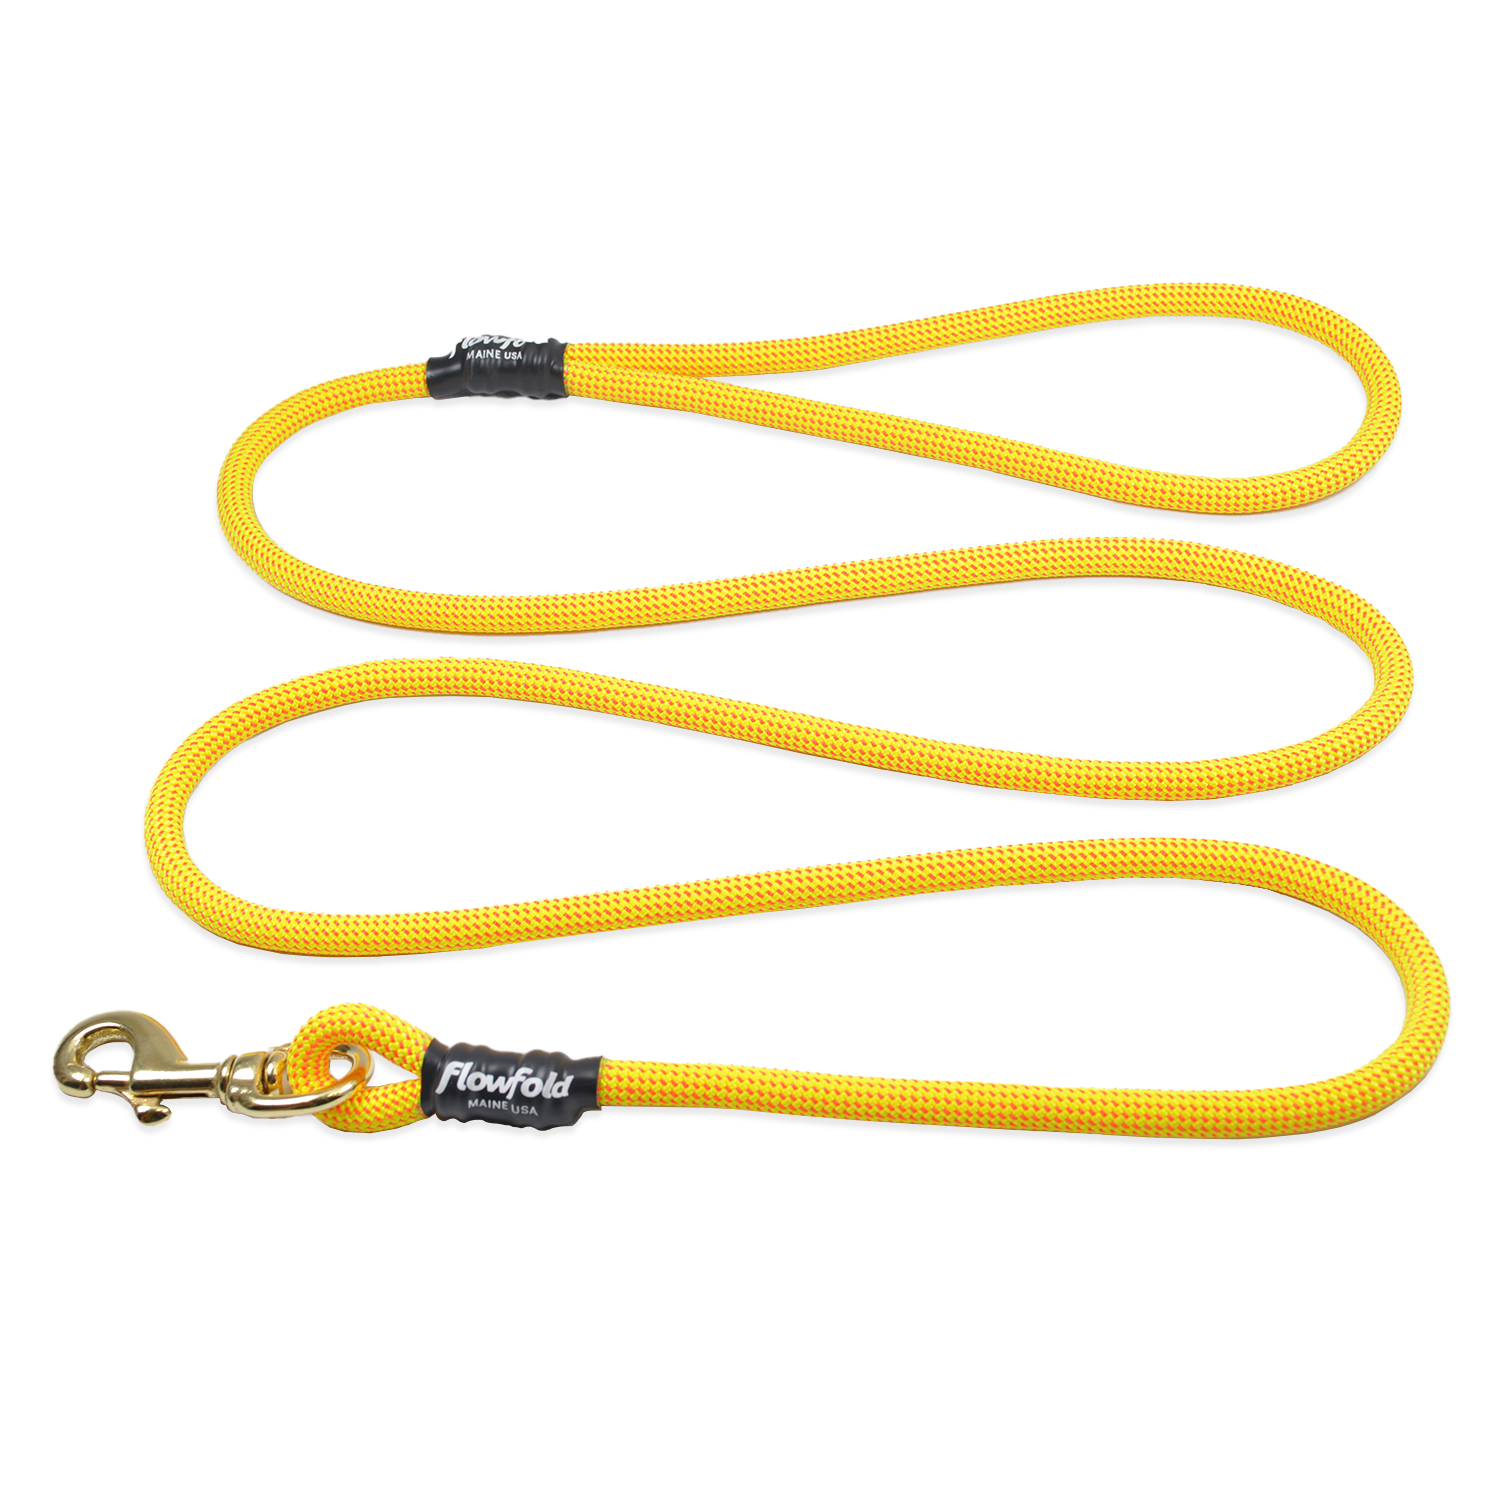 Flowfold Yellow Trailmate Recycled Climbing Rope Dog Leash 6 Feet Made in USA